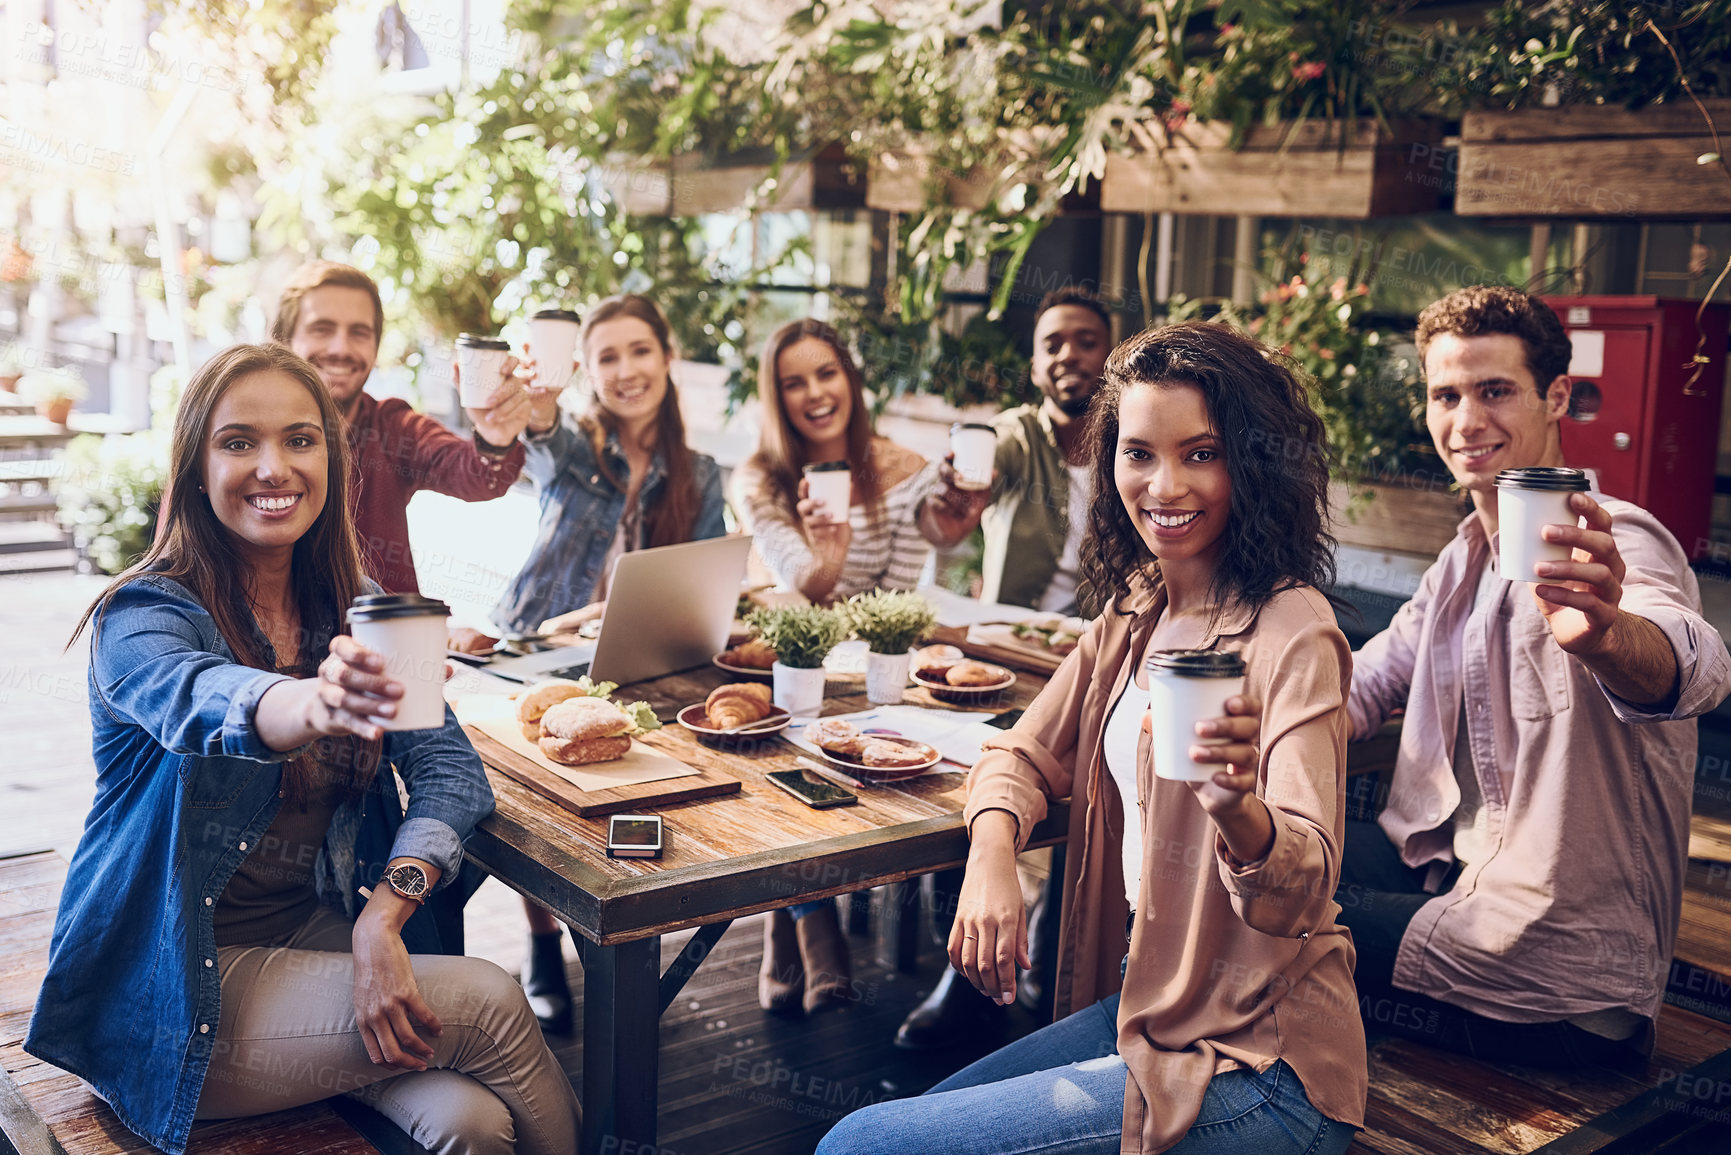 Buy stock photo Shot of a group of creative workers out on a business lunch